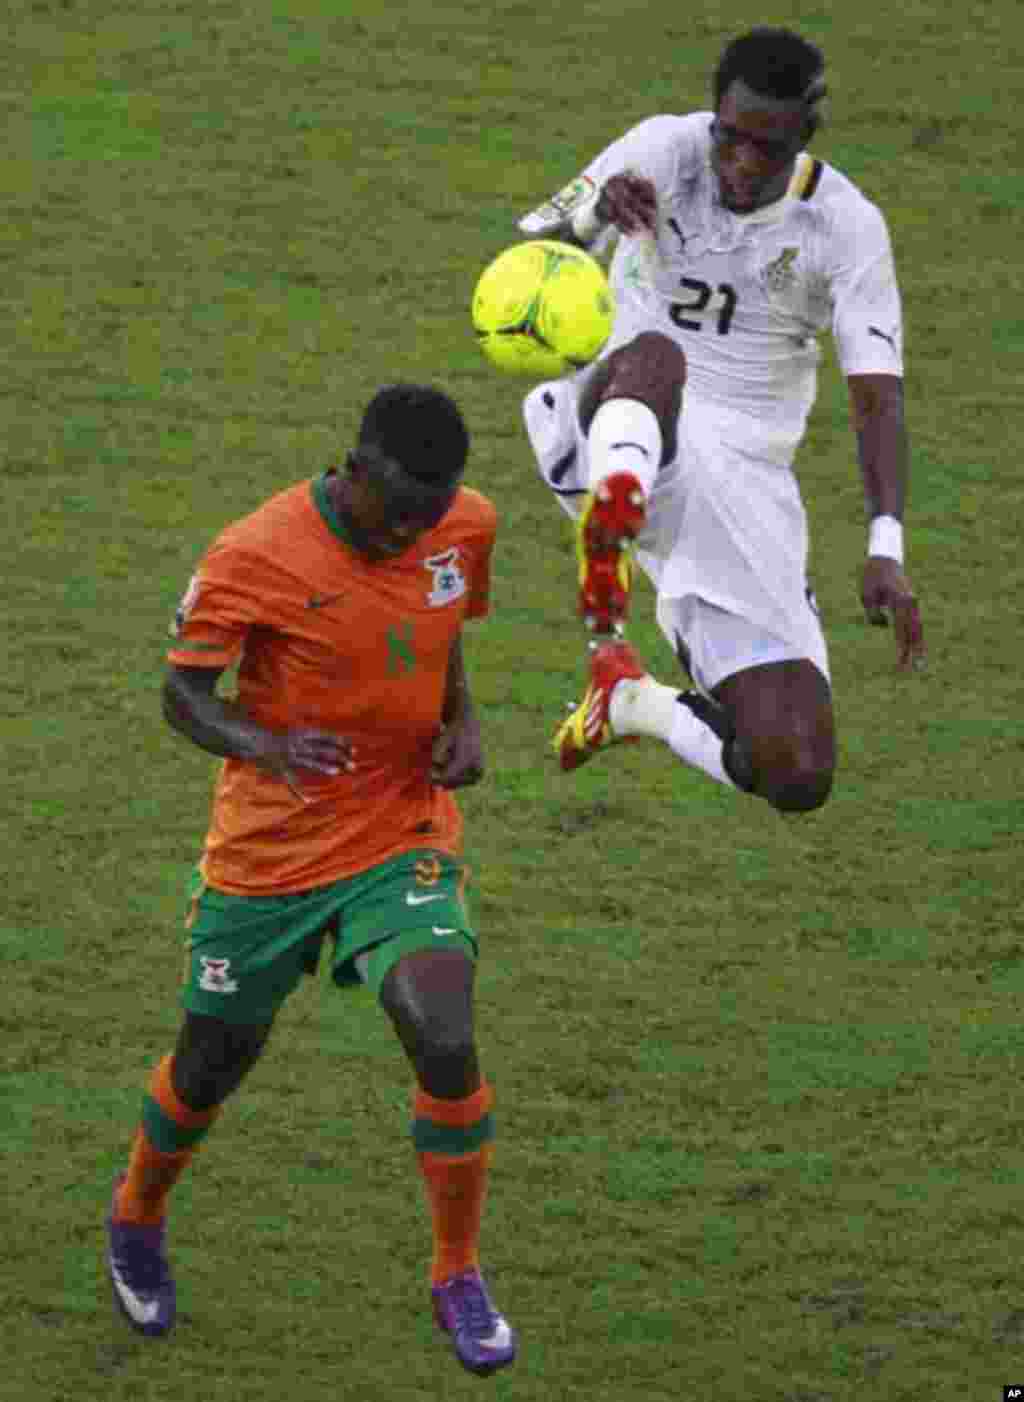 Isaac Chansa (bottom) of Zambia fights for the ball with John Boye of Ghana during their African Nations Cup semi-final soccer match at Estadio de Bata "Bata Stadium" in Bata February 8, 2012.